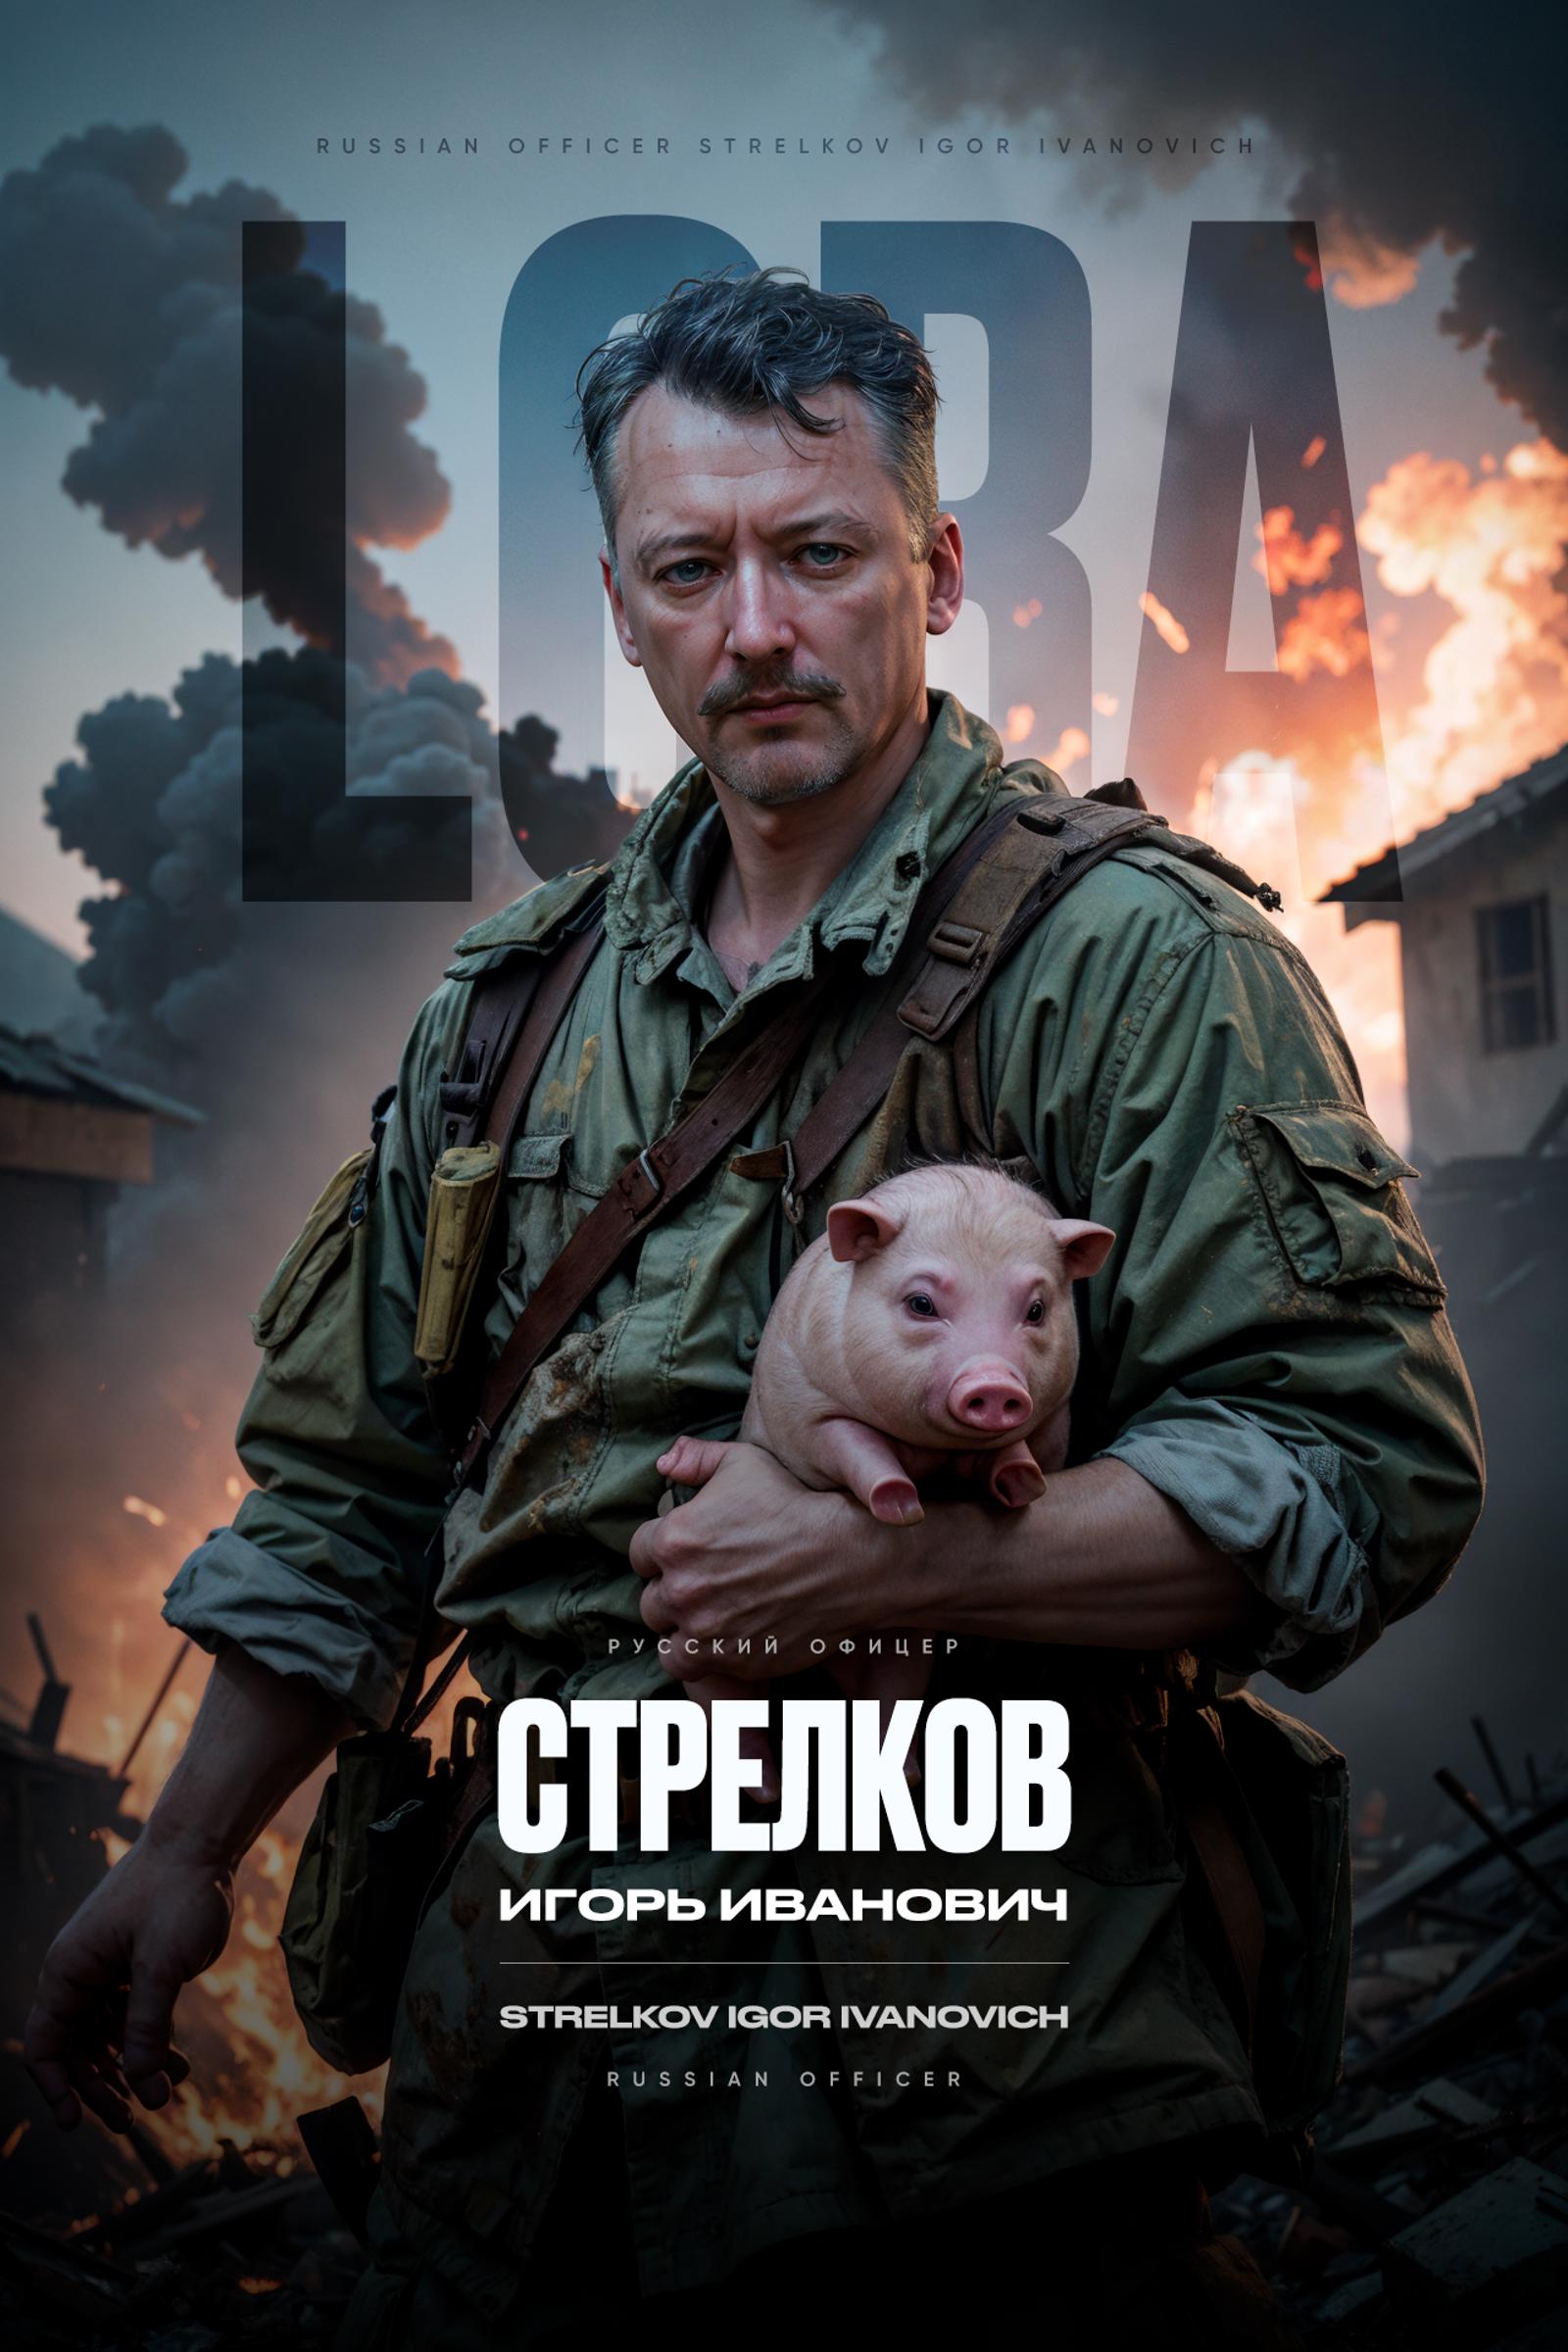 Man holding a piglet in a movie poster for Luba.